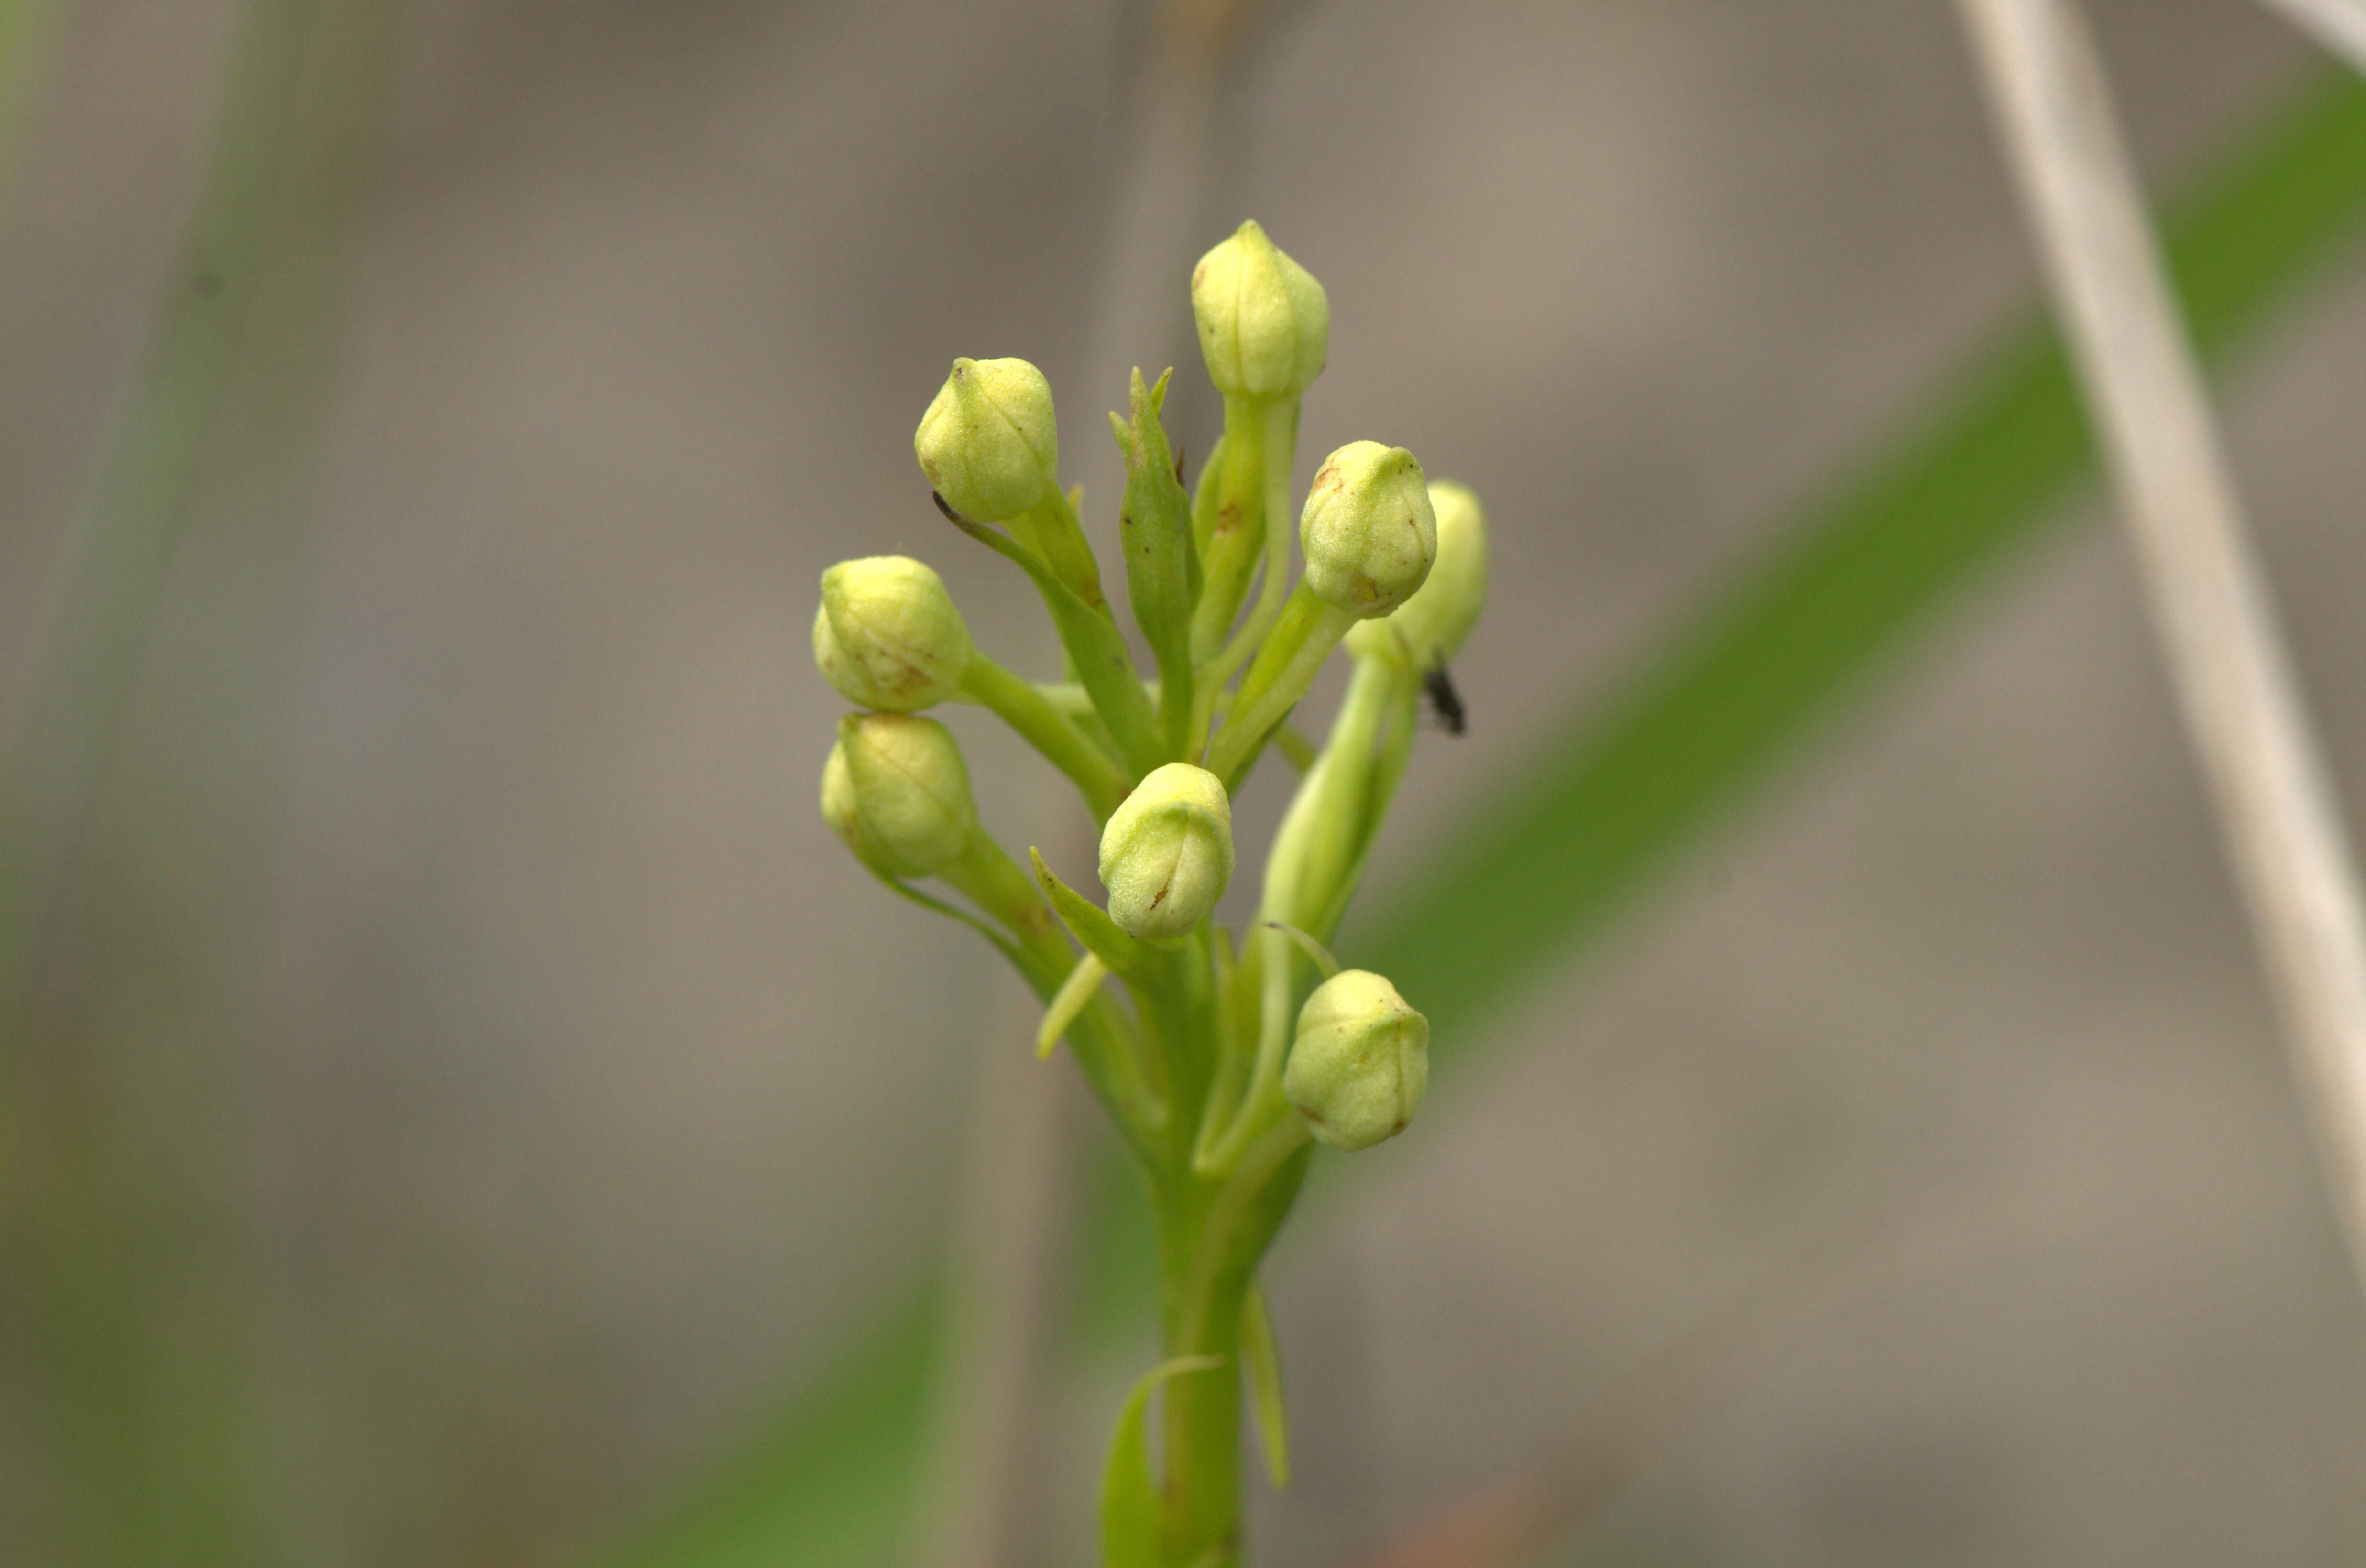 Image of Eastern prairie fringed orchid